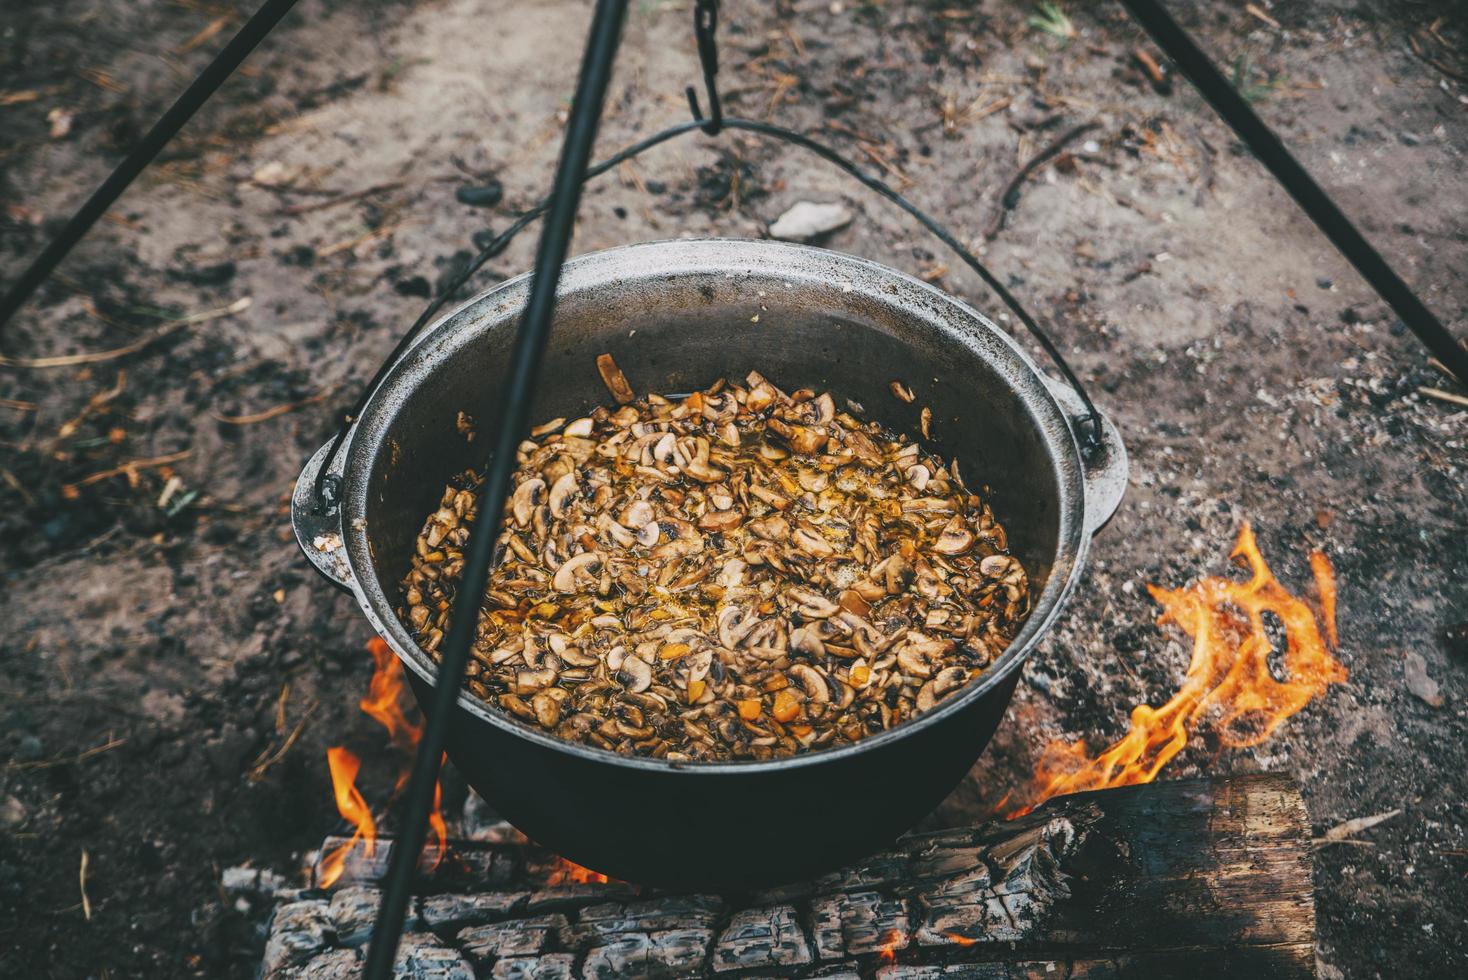 Food being cooked on campfire photo